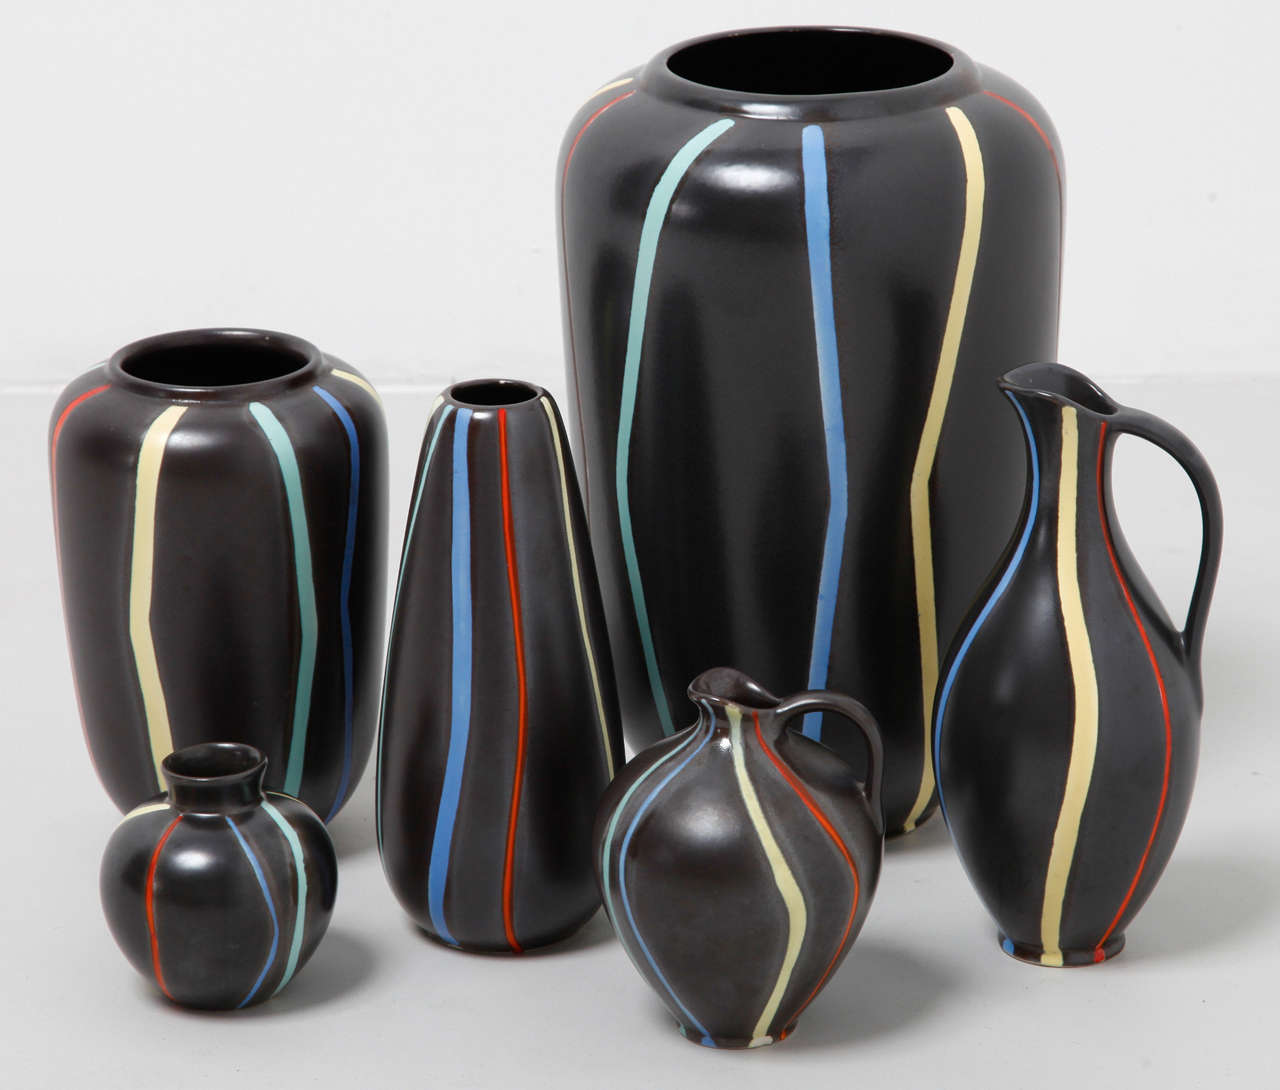 A set of six ornamental ceramics vases designed by Ursula Fesca in 1956 with Dekor Pisa.
Conducted at repairer Waechtersbacher ceramics,
Schlierbach / Hessen.
Hand painted Dekor and characteristic of glaze structure.
4 pieces still available